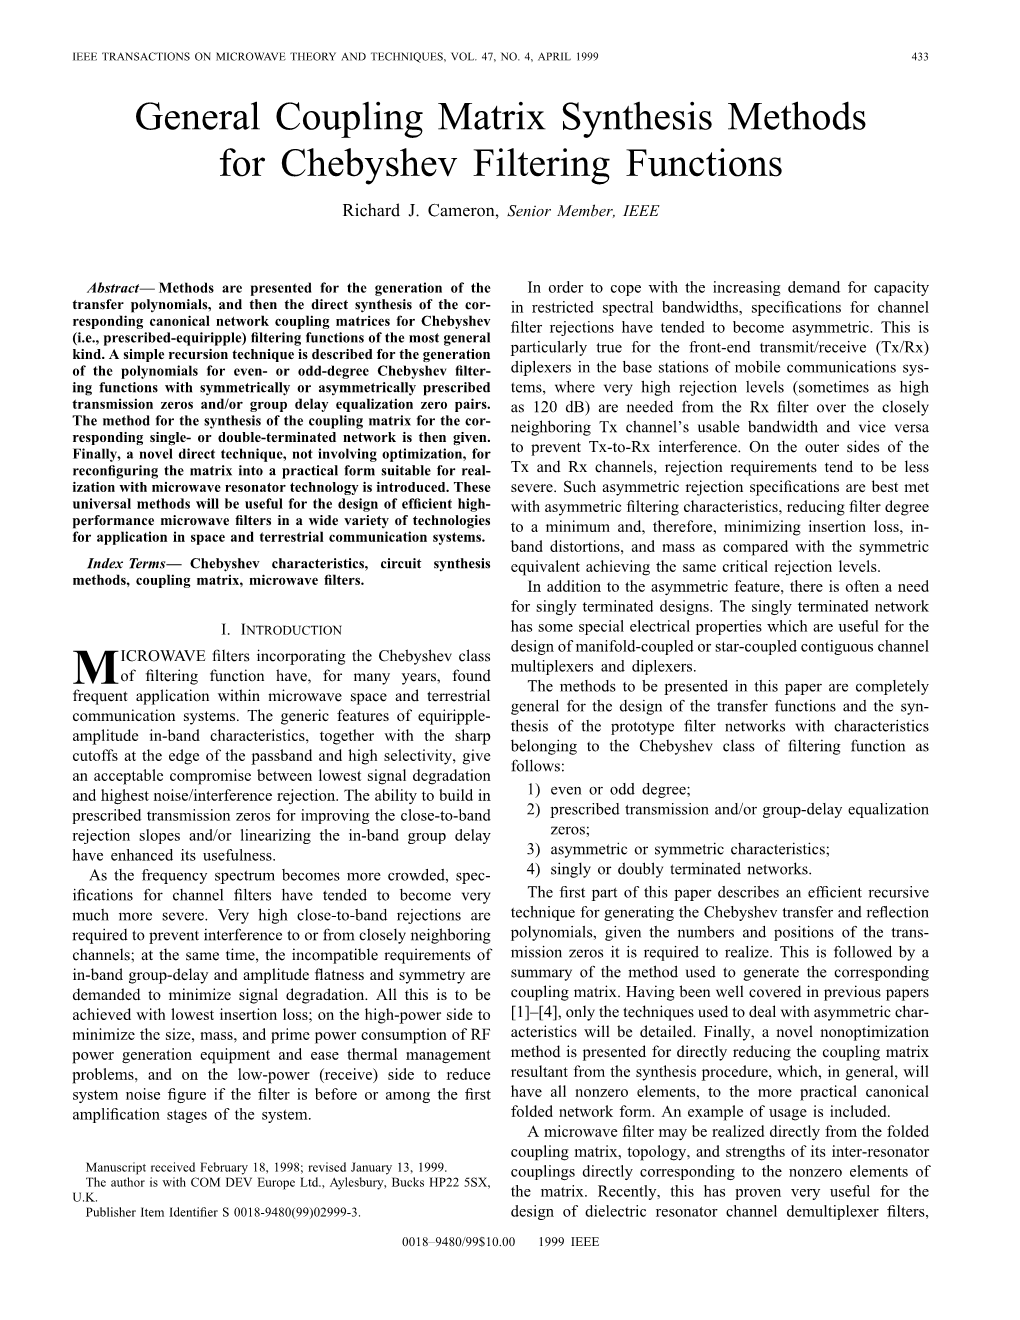 General Coupling Matrix Synthesis Methods for Chebyshev Filtering Functions